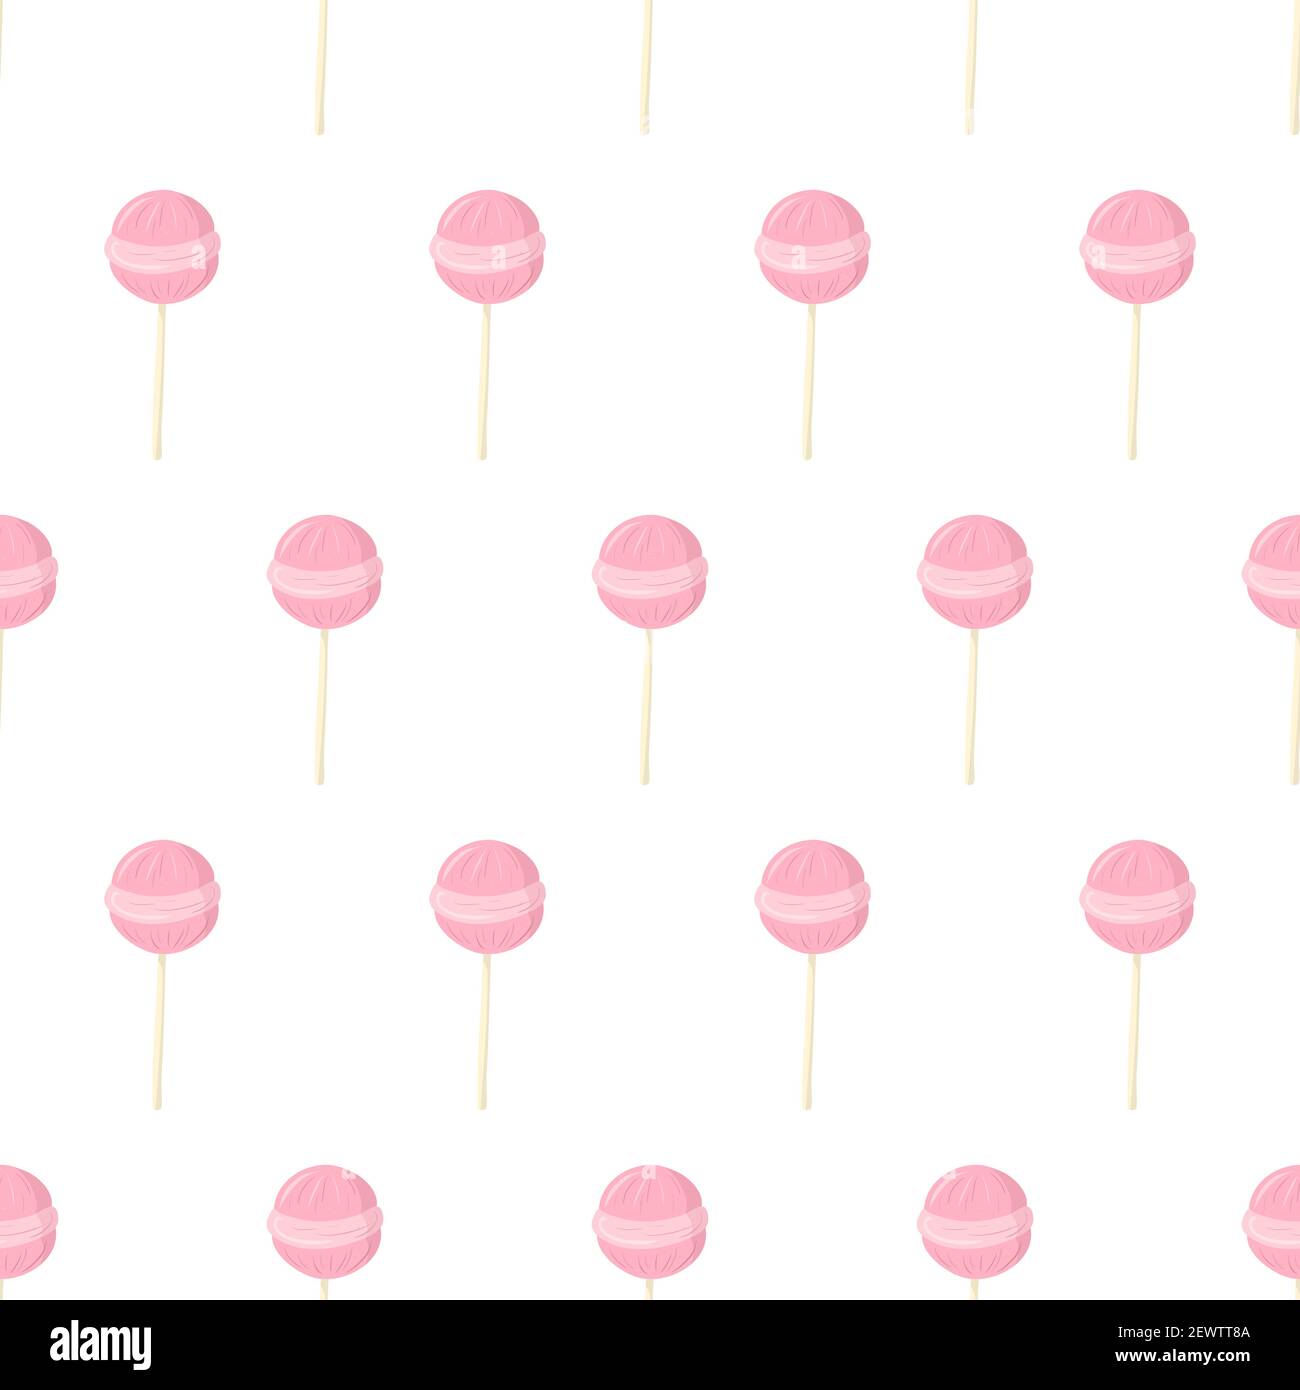 Cartoon seamless pattern for paper design with pink lollipop candy. Colorful background. Stock Vector